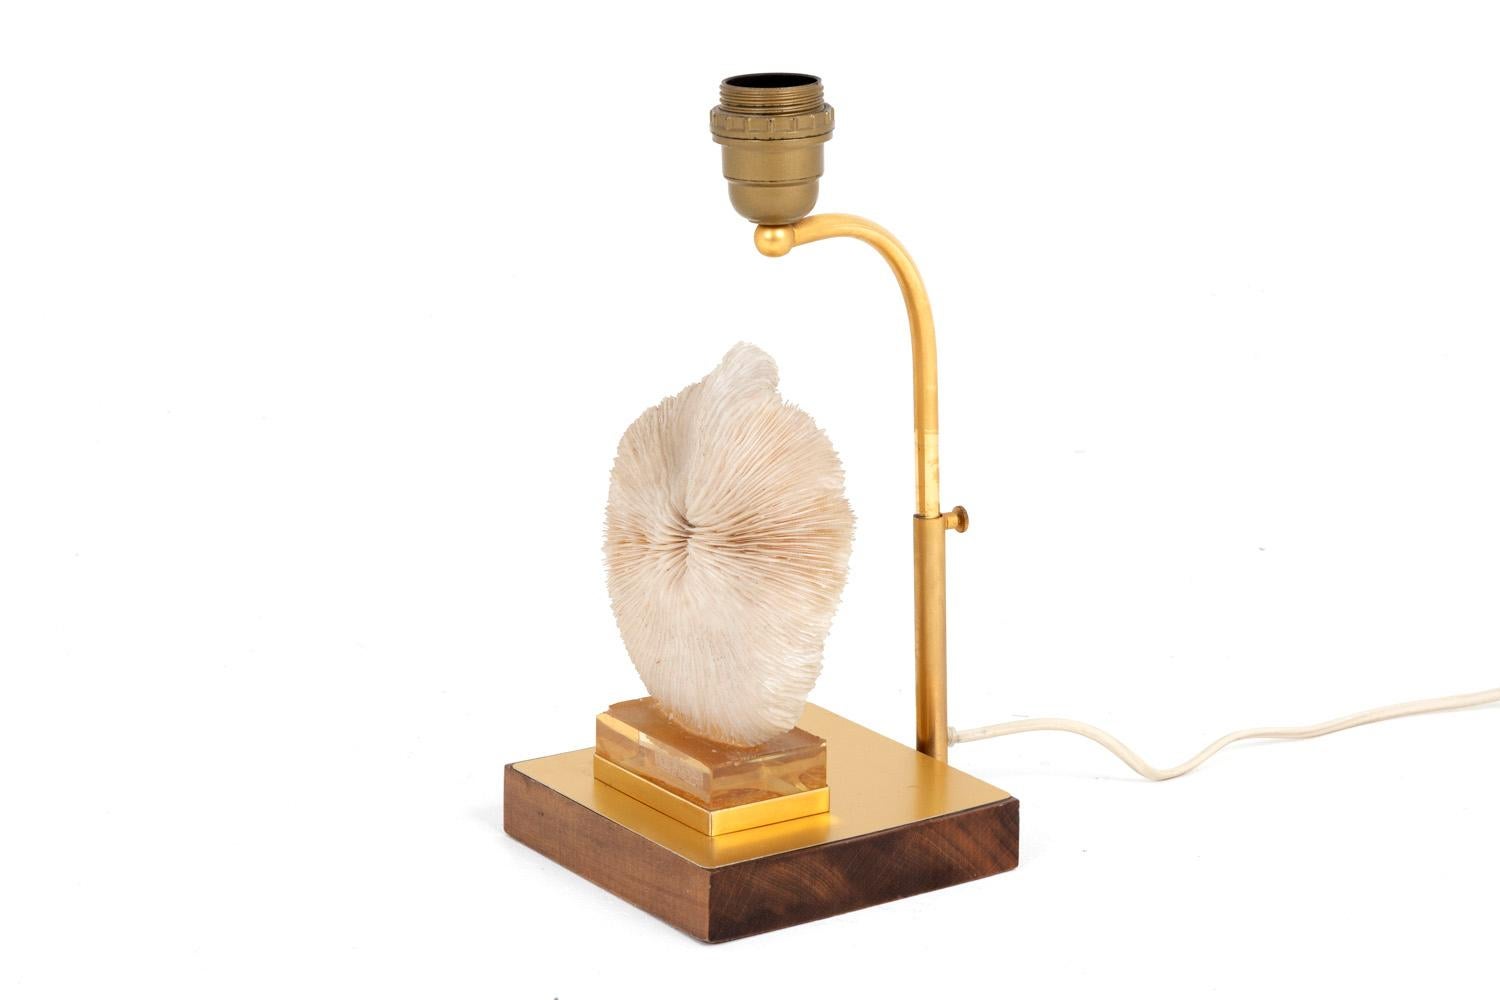 European Lamp Fungia Fungites Coral and Gilt Brass, 1970s For Sale